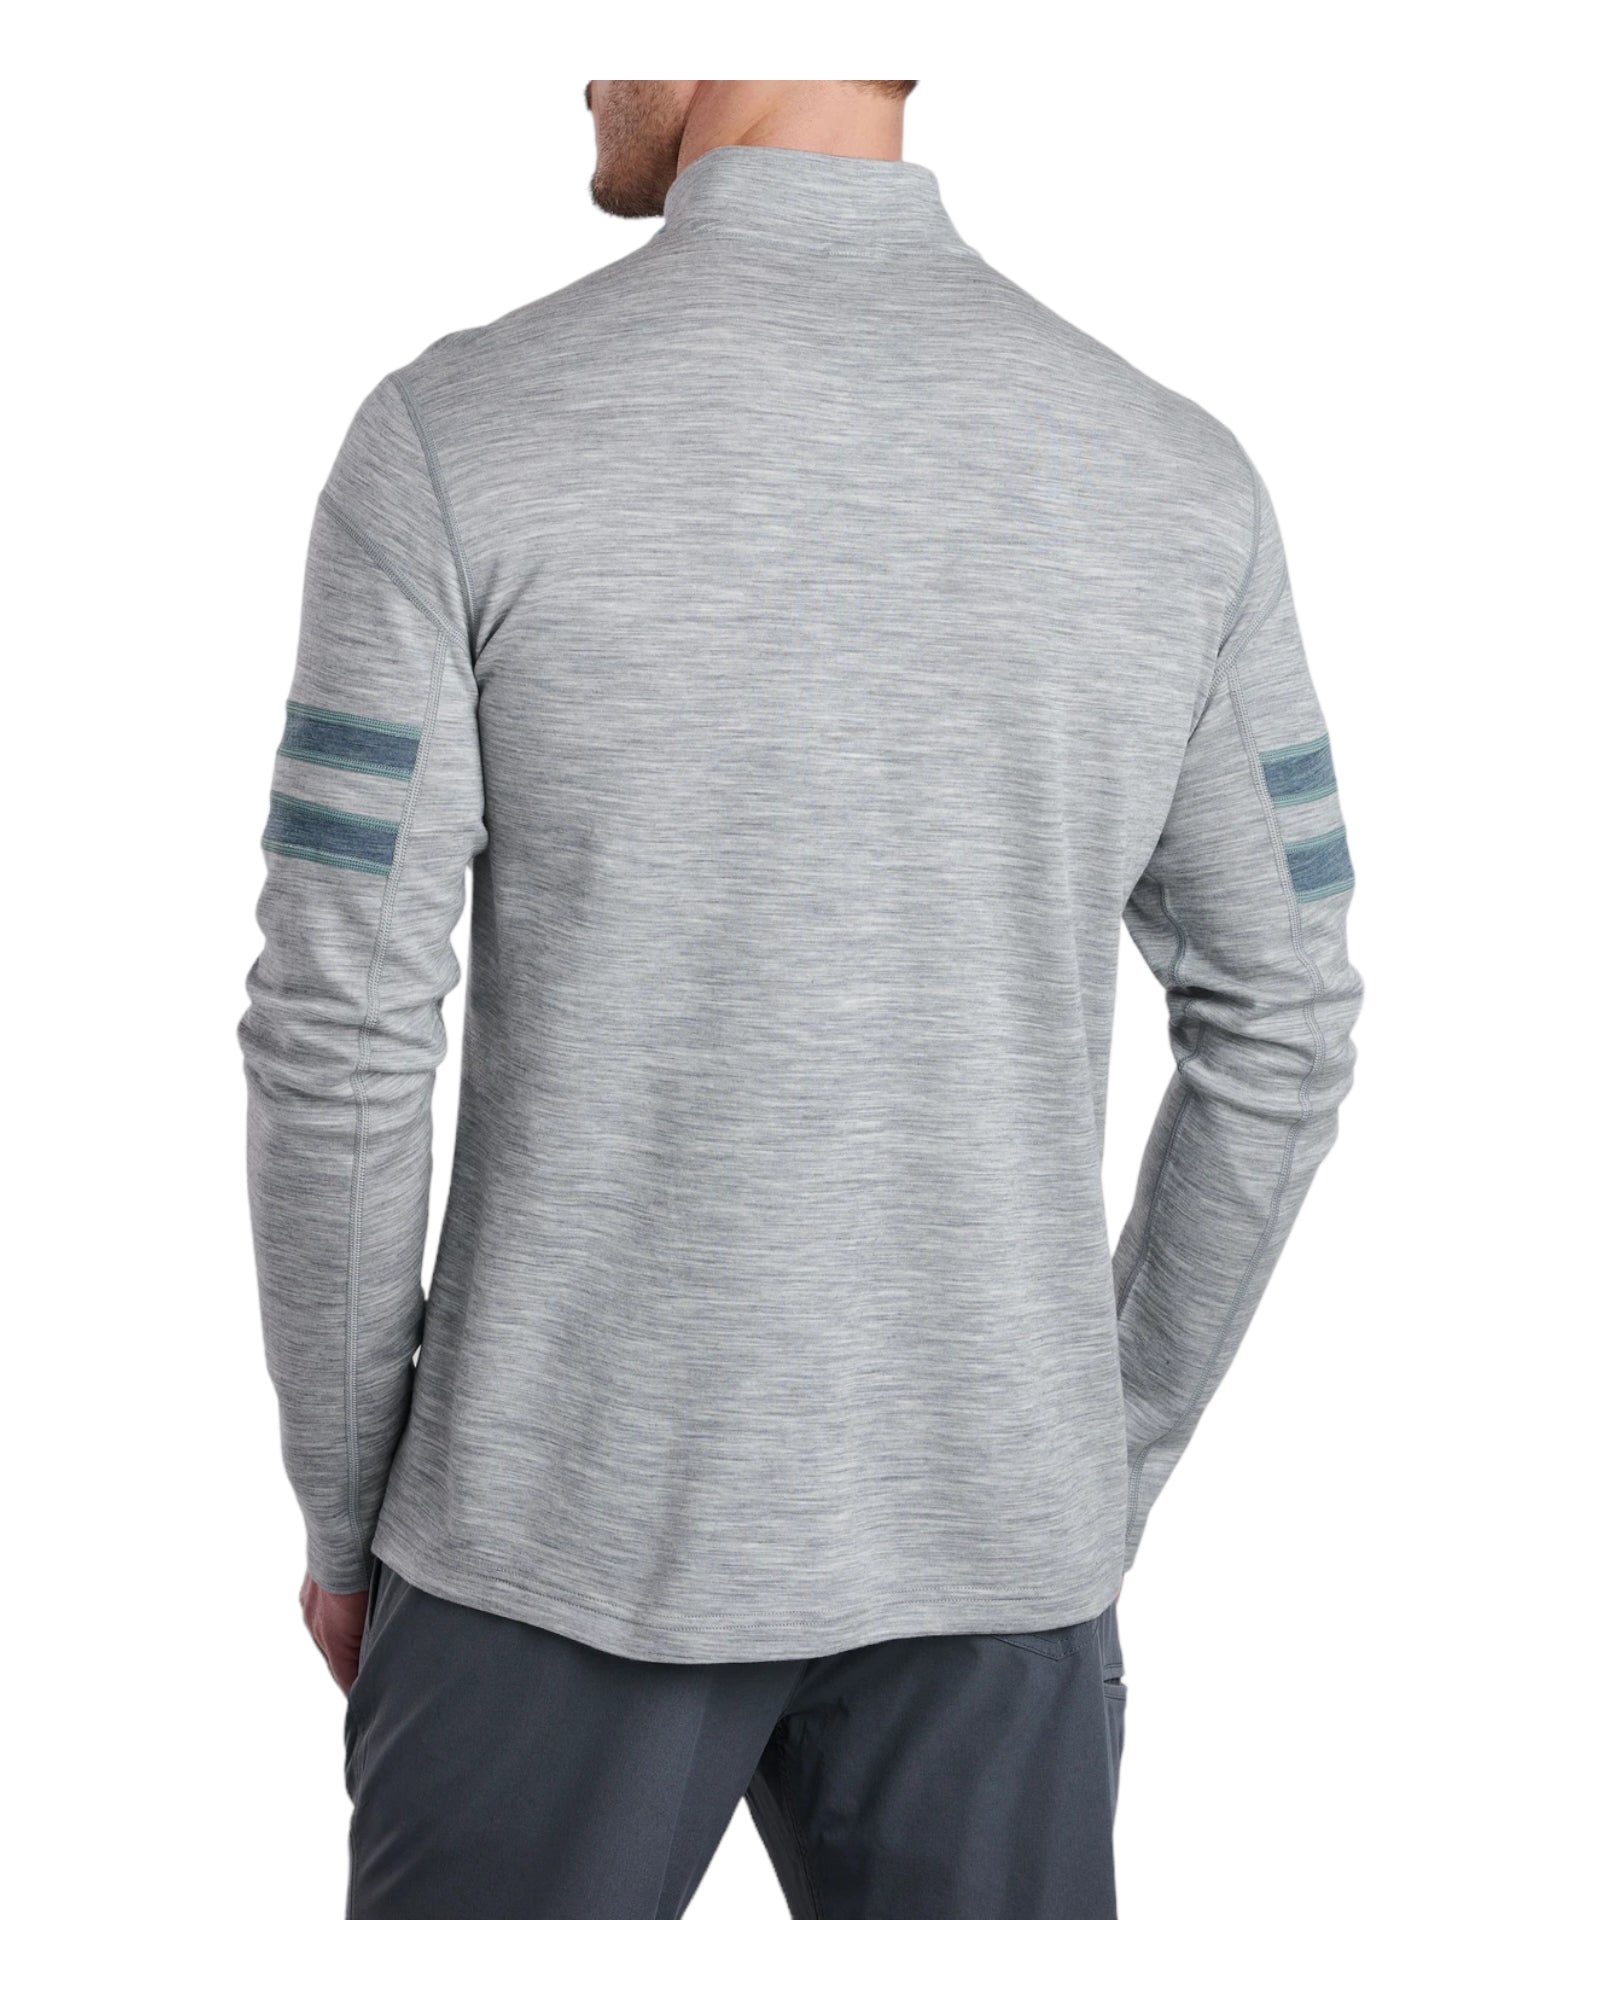 The Ikonik KÜHL TEAM sweater just got better as the KÜHL TEAM MERINO 1/4 ZIP. We chose a superfine merino so it’s softer on your skin and naturally odour-resistant.